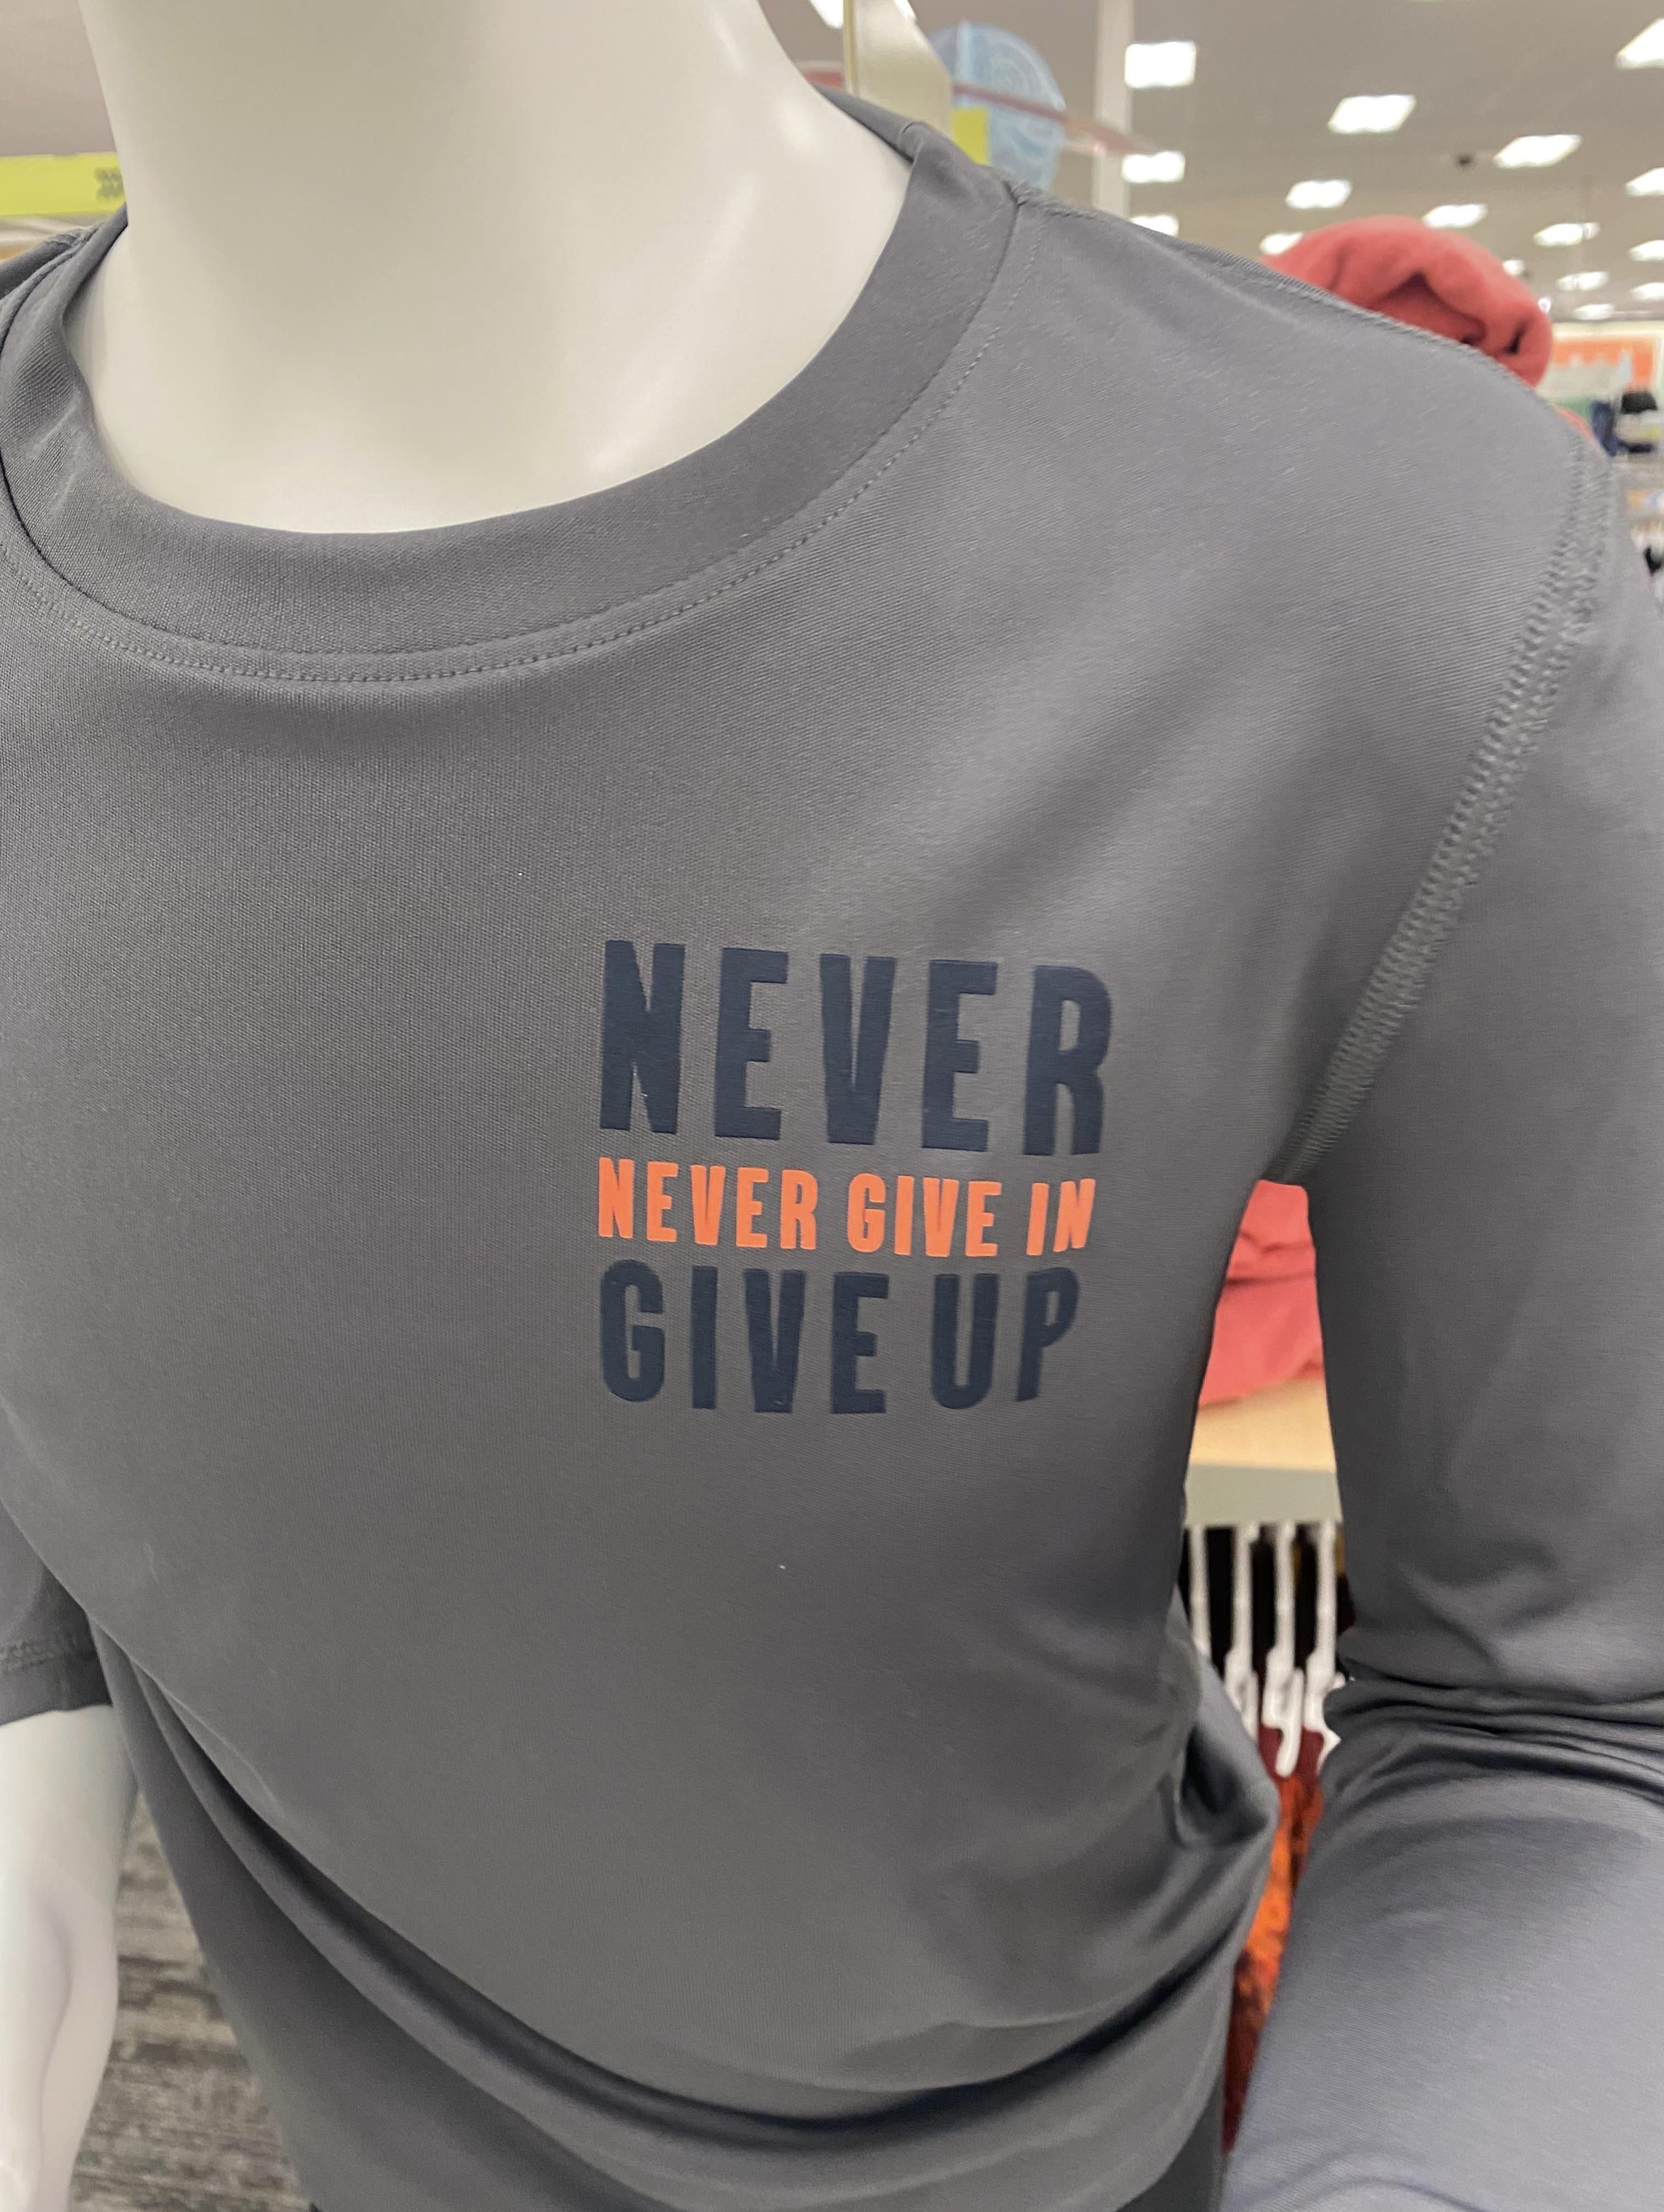 Never never give in, give up